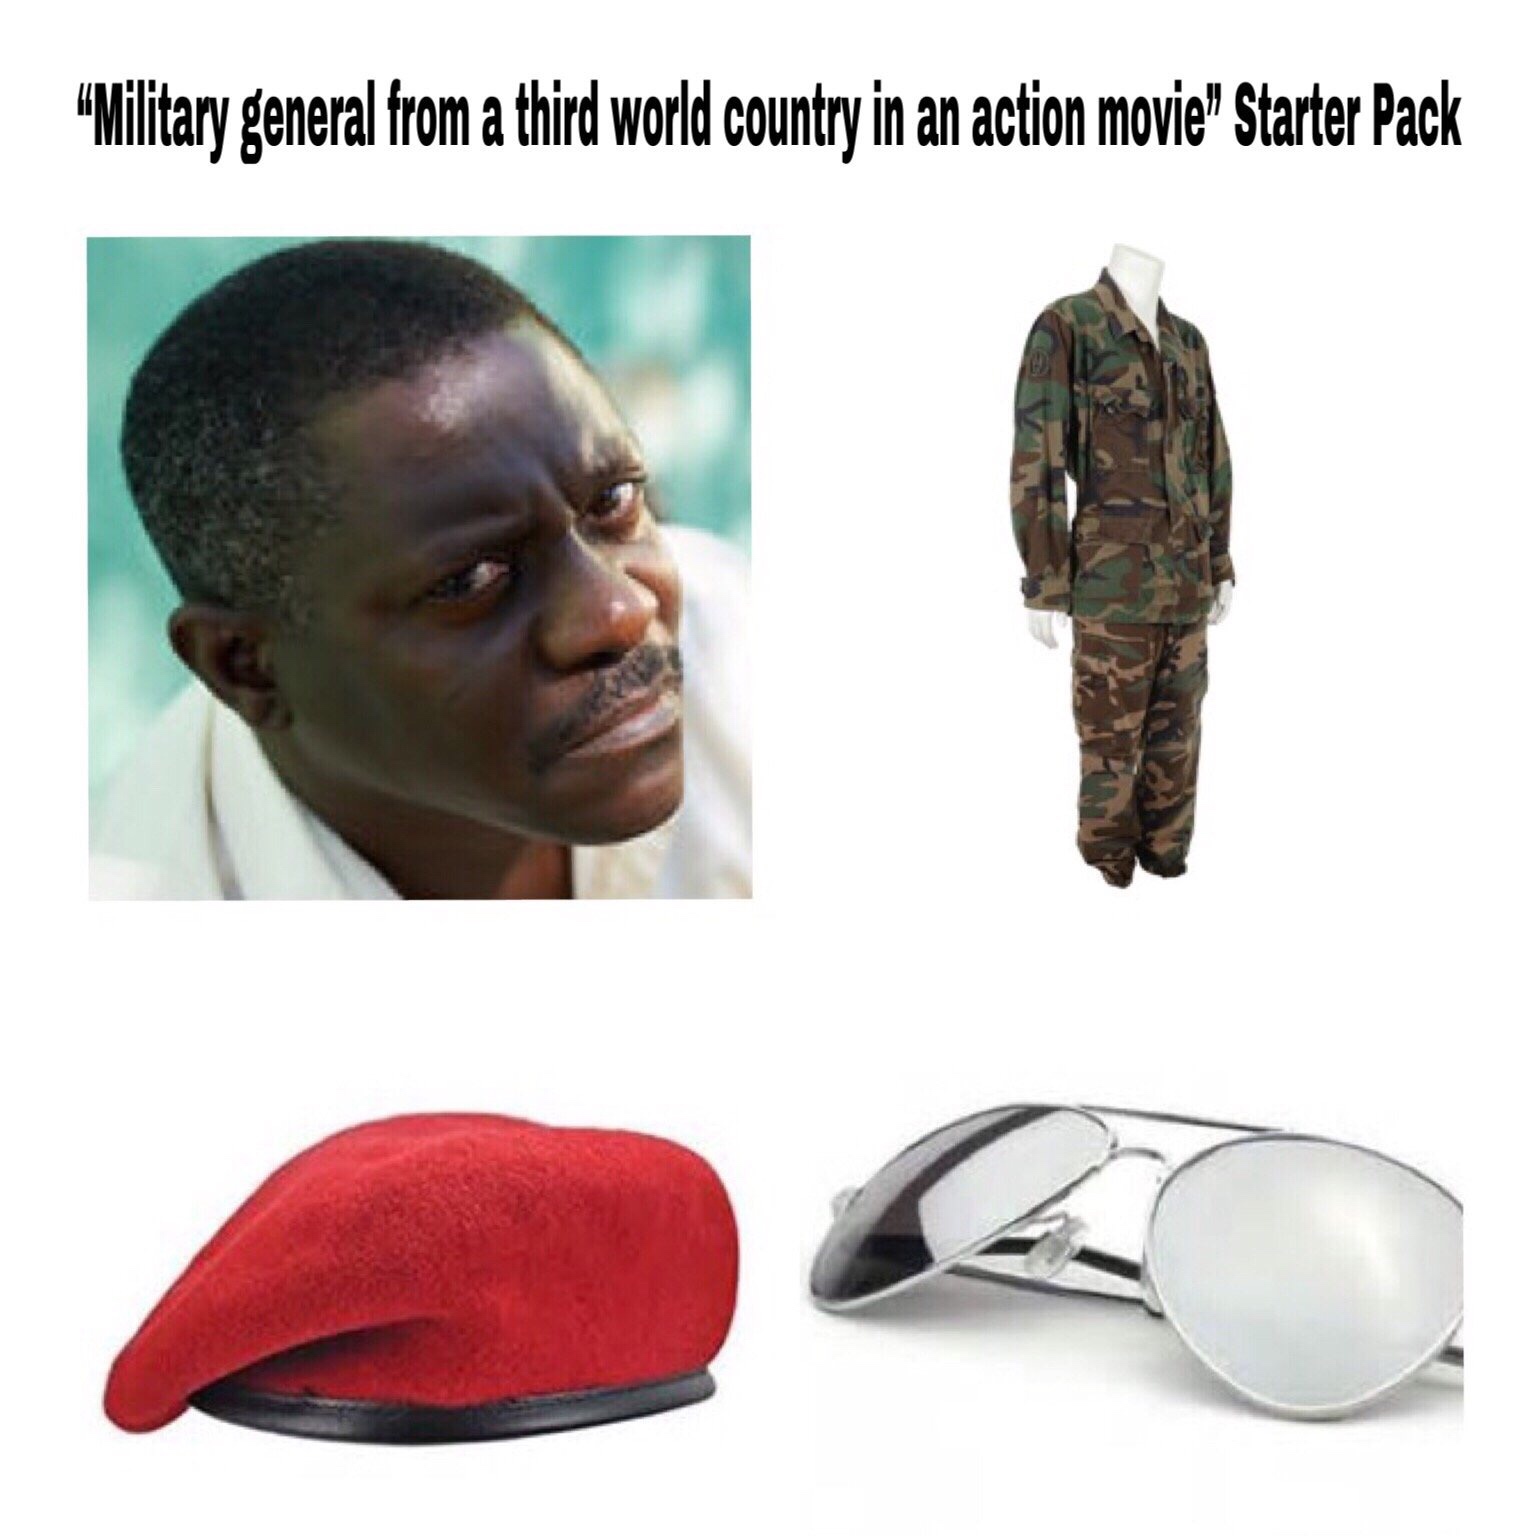 military general from a third world country - Military general from a third world country in an action movie" Starter Pack